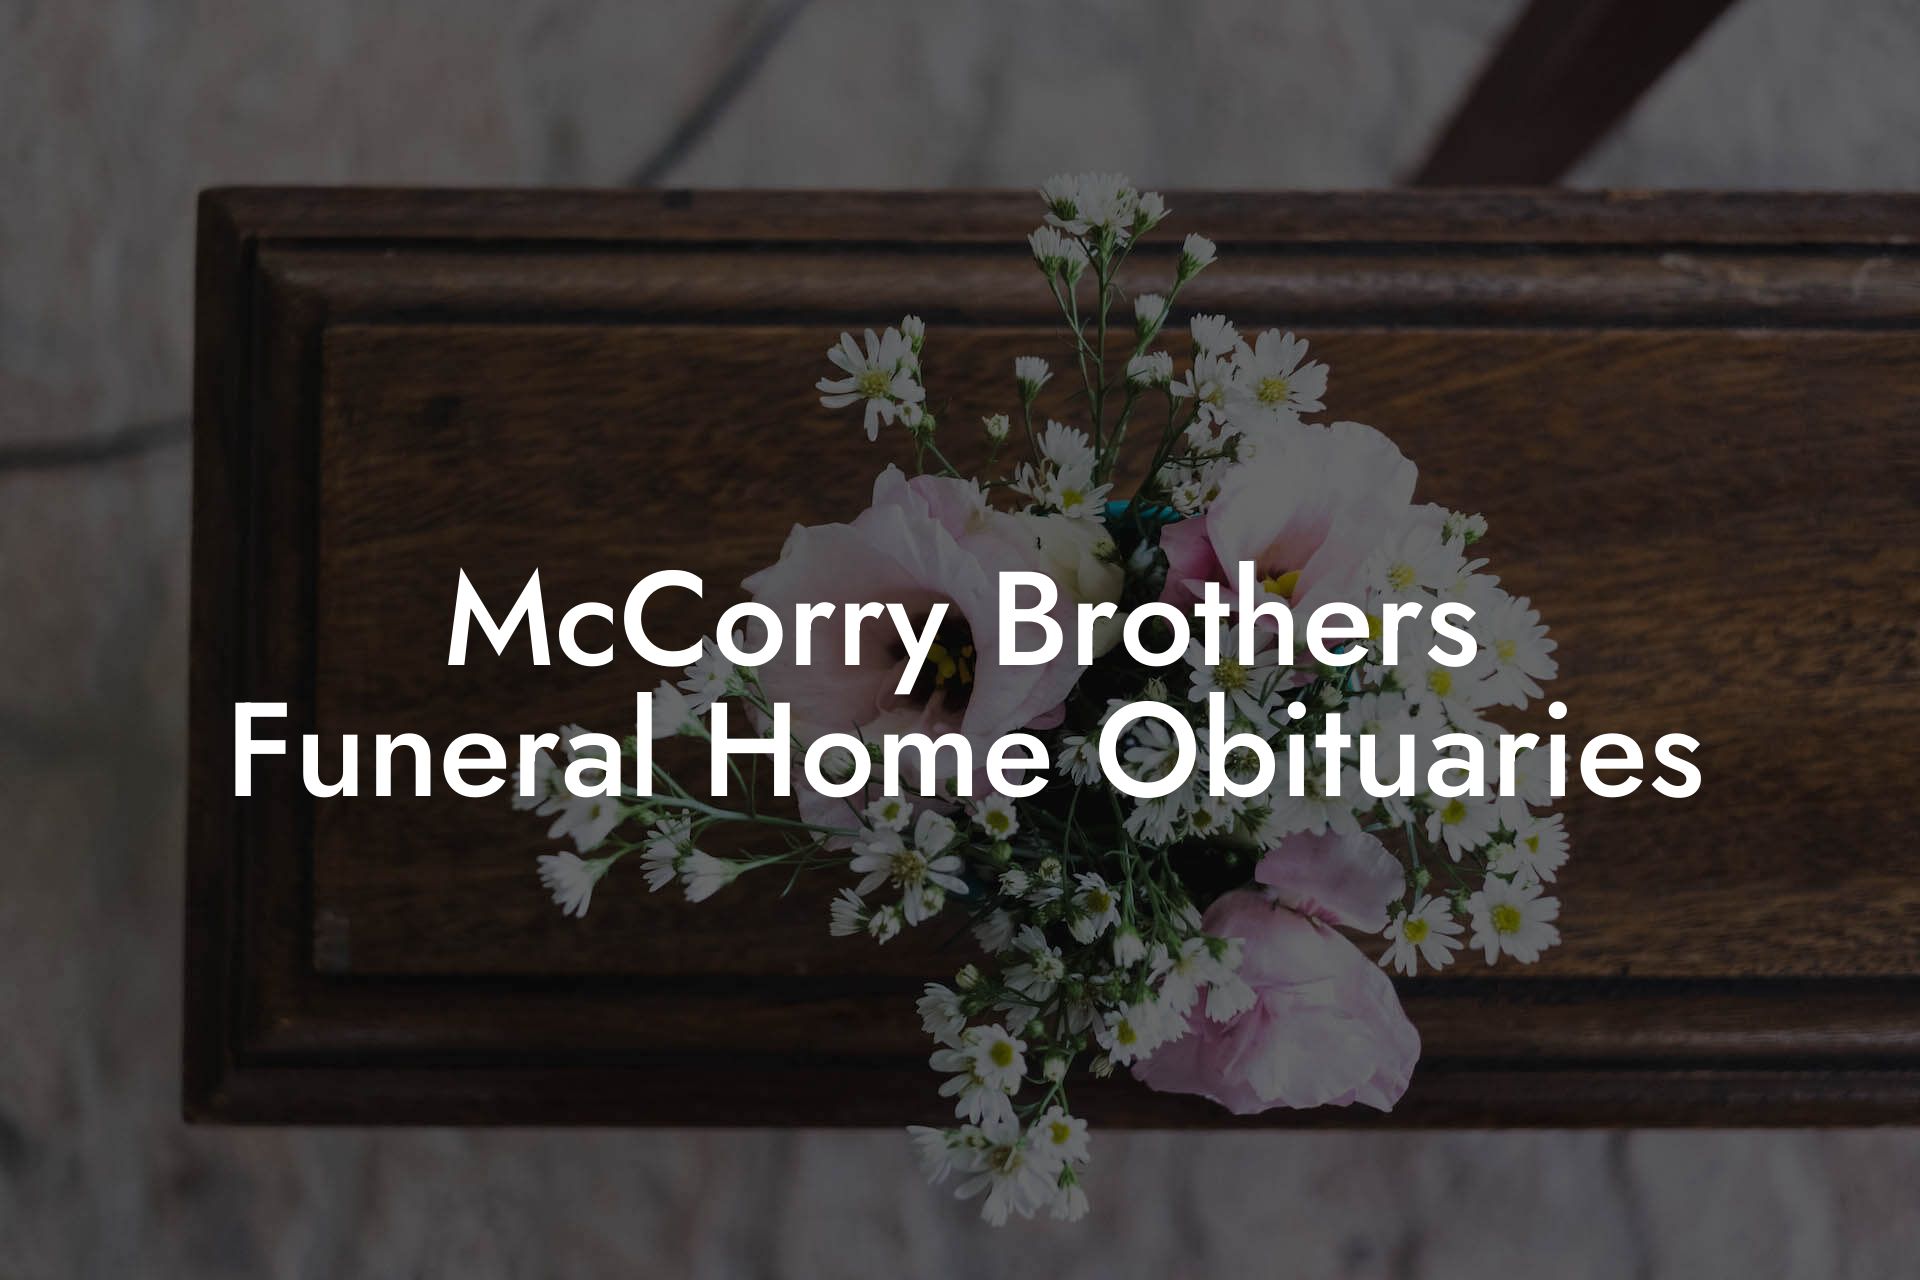 McCorry Brothers Funeral Home Obituaries